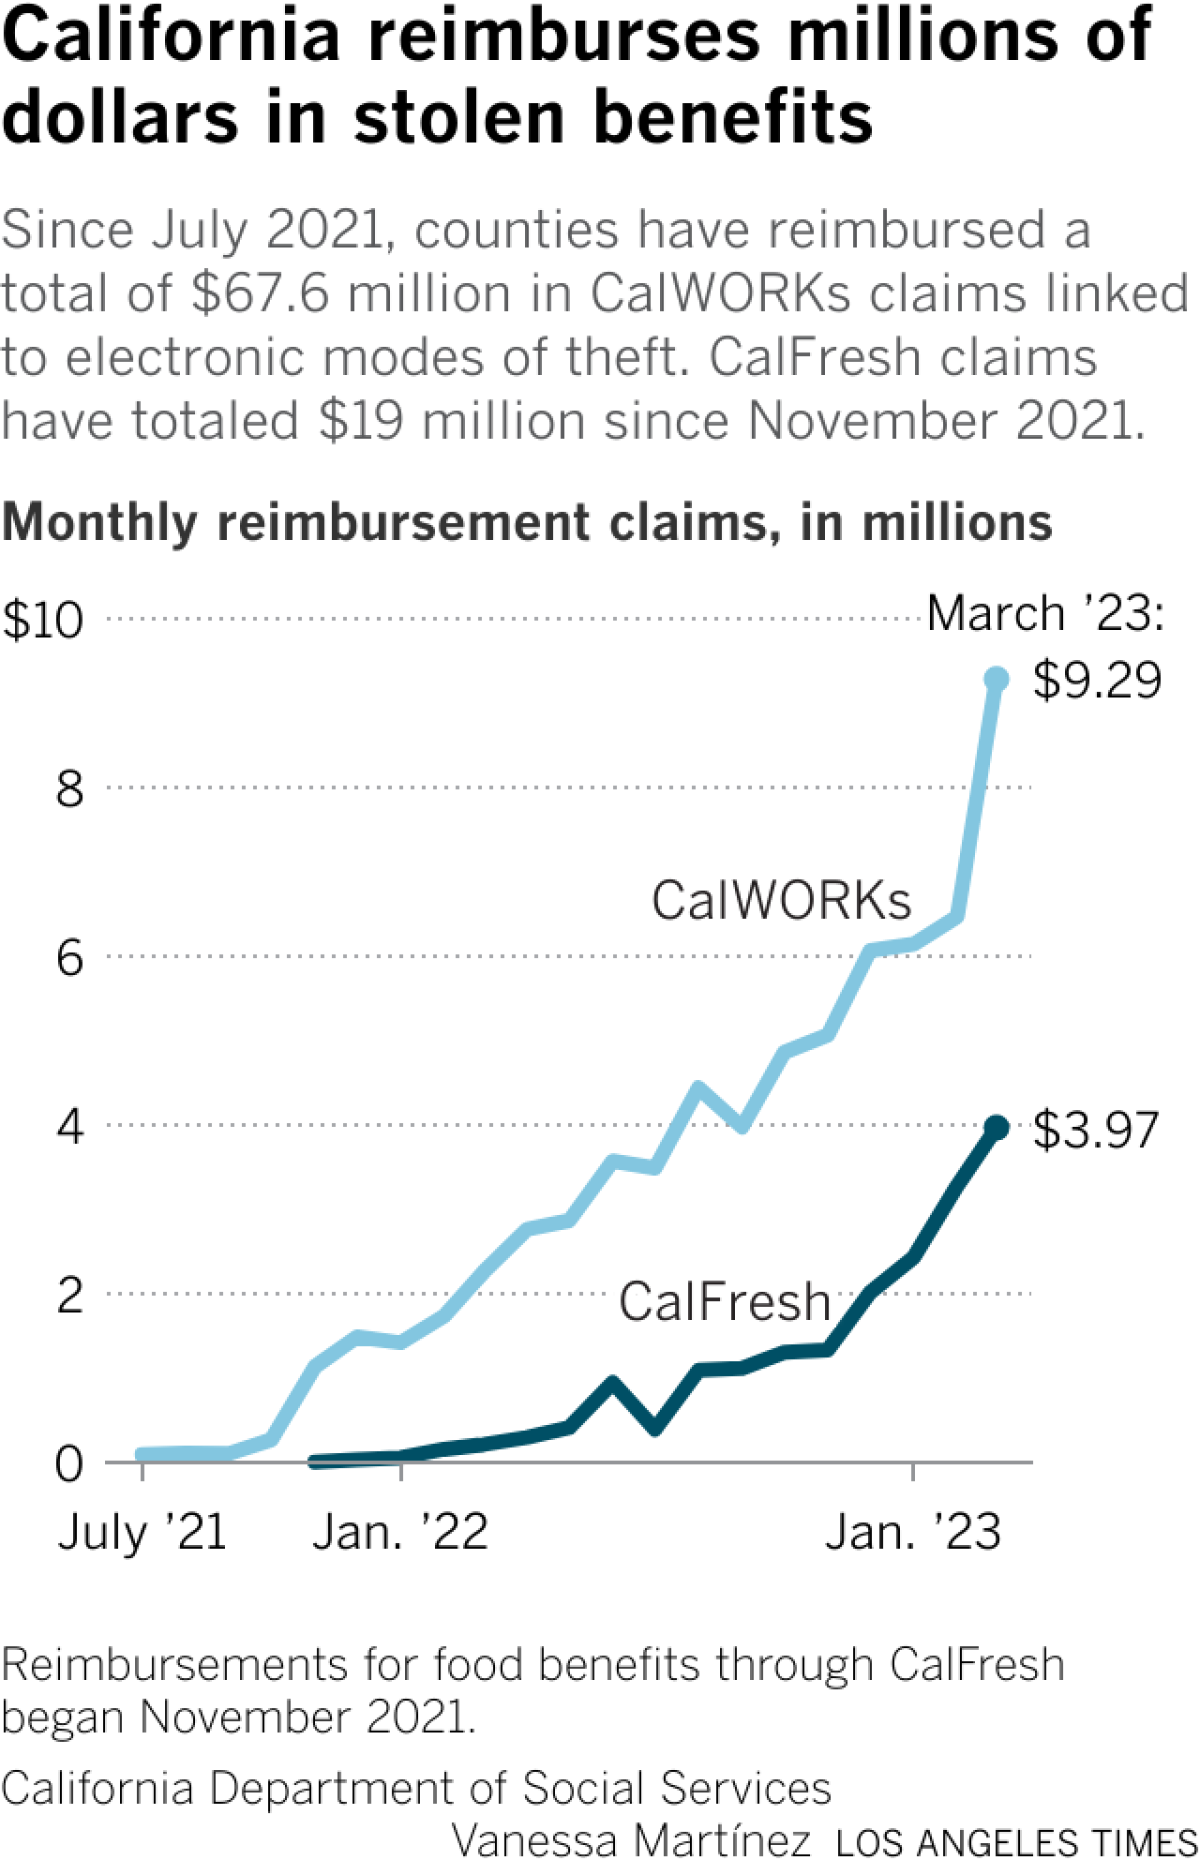 A line chart with a line for CalWORKs benefit reimbursements and another line for CalFresh reimbursements. In March 2023, California counties reimbursed 9.29 million dollars in CalWORKs claims and 3.97 million dollars in CalFresh claims. Overall, counties have reimbursed a total of 67.6 million dollars in CalWORKs claims since July 2021 and 19 million dollars in CalFresh claims since November 2021.